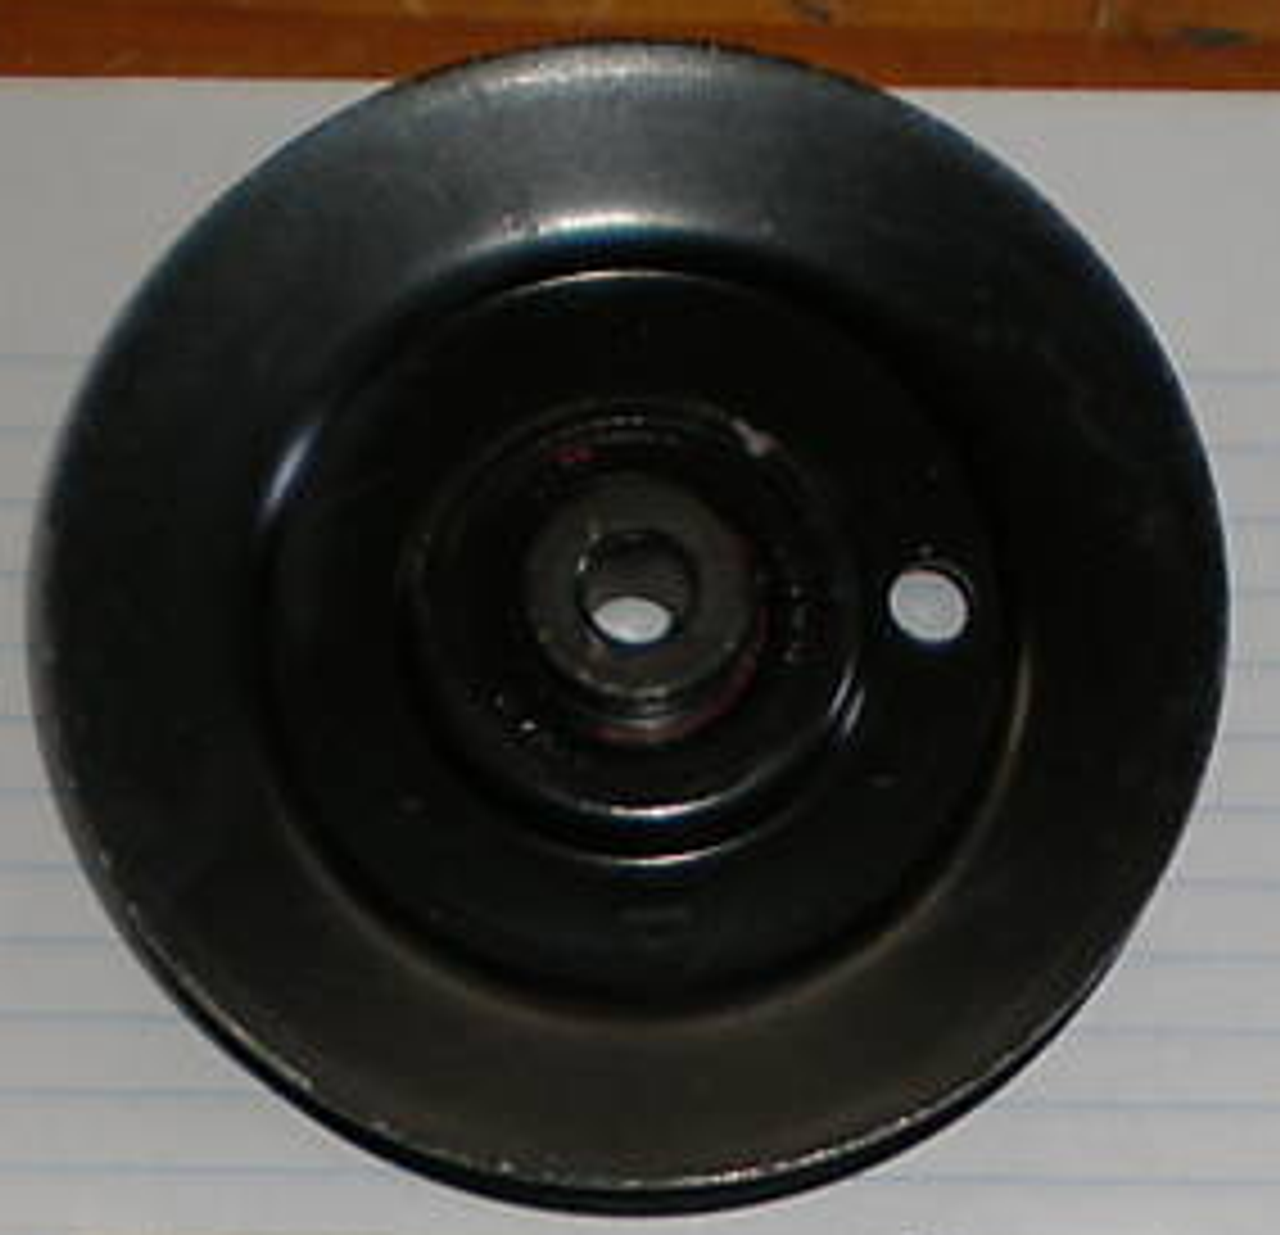 TORO 92-7084 - PULLEY-IDLER, FLAT
SUPERCESSION 115119
Where Used: Part Number 92-7084
Model Name Diagram
78231, 42" Side Discharge Mower, 260 Series Lawn
and Garden Tractors, 1998 (SN 8900001-8999999)
PULLEYS & IDLER ARM ASSEMBLY
78231, 42" Side Discharge Mower, 260 Series Lawn
and Garden Tractors, 1999 (SN 9900001-9999999)
BLADE, SPINDLE AND PULLEY ASSEMBLY
78231, 42" Side Discharge Mower, 260 Series Lawn
and Garden Tractors, 2000 (SN 200000001-
BLADE, SPINDLE AND PULLEY ASSEMBLY
78231, 42" Side Discharge Mower, 260 Series Lawn
and Garden Tractors, 2001 (SN 210000001-
BLADE, SPINDLE AND PULLEY ASSEMBLY
78231, 42" Side Discharge Mower, 260 Series Lawn
and Garden Tractors, 2002 (SN 220000001-
BLADE, SPINDLE AND PULLEY ASSEMBLY
78231, 42" Side Discharge Mower, 260 Series Lawn
and Garden Tractors, 2003 (SN 230000001-
BLADE, SPINDLE AND PULLEY ASSEMBLY
78231, 42" Side Discharge Mower, 260 Series Yard
Tractors, 1994 (SN 4900001-4999999)
PULLEYS & IDLER ARM ASSEMBLY
78231, 42" Side Discharge Mower, 260 Series Yard
Tractors, 1995 (SN 5900001-5999999)
PULLEYS & IDLER ARM ASSEMBLY
78231, 42" Side Discharge Mower, 260 Series Yard
Tractors, 1996 (SN 6900001-6999999)
PULLEYS & IDLER ARM ASSEMBLY
78231, 42" Side Discharge Mower, 260 Series Yard
Tractors, 1997 (SN 7900001-7999999)
PULLEYS & IDLER ARM ASSEMBLY
78232, 42" Side Discharge Mower, 260 Series Lawn
and Garden Tractors, 1998 (SN 8900001-8999999)
DECK ASSEMBLY
78232, 42" Side Discharge Mower, 260 Series Lawn
and Garden Tractors, 2000 (SN 200000001-
BLADE, SPINDLE AND PULLEY ASSEMBLY
78232, 42" Side Discharge Mower, 260 Series Lawn
and Garden Tractors, 2001 (SN 210000001-
BLADE, SPINDLE AND PULLEY ASSEMBLY
78232, 42" Side Discharge Mower, 260 Series Yard
Tractors, 1996 (SN 6900001-6999999)
DECK ASSEMBLY
78232, 42" Side Discharge Mower, 260 Series Yard
Tractors, 1997 (SN 7900001-7999999)
DECK ASSEMBLY
78260, 48" Side Discharge Mower, 260 Series Yard
Tractors, 1994 (SN 4900001-4999999)
DECK & IDLER ASSEMBLY
78260, 48" Side Discharge Mower, 260 Series Yard
Tractors, 1995 (SN 5900001-5999999)
DECK & IDLER ASSEMBLY
78260, 48" Side Discharge Mower, 260 Series Yard
Tractors, 1996 (SN 6900001-6999999)
DECK & IDLER ASSEMBLY
78260, 48" Side Discharge Mower, 260 Series Yard
Tractors, 1997 (SN 7900001-7999999)
DECK & IDLER ASSEMBLY
78261, 48" Side Discharge Mower, 260 Series Lawn
and Garden Tractors, 1998 (SN 8900001-8999999)
DECK ASSEMBLY
78261, 48" Side Discharge Mower, 260 Series Lawn
and Garden Tractors, 1999 (SN 9900001-9999999)
DECK ASSEMBLY
78261, 48" Side Discharge Mower, 260 Series Lawn
and Garden Tractors, 2000 (SN 200000001-
REINFORCEMENT PLATE ASSEMBLY
78261, 48" Side Discharge Mower, 260 Series Lawn
and Garden Tractors, 2001 (SN 210000001-
REINFORCEMENT PLATE ASSEMBLY
78261, 48" Side Discharge Mower, 260 Series Lawn
and Garden Tractors, 2002 (SN 220000001-
REINFORCEMENT PLATE ASSEMBLY
78261, 48" Side Discharge Mower, 260 Series Lawn
and Garden Tractors, 2003 (SN 230000001-
REINFORCEMENT PLATE ASSEMBLY
78265, 48" Recycler Mower, 260 Series Lawn and
Garden Tractors, 1998 (SN 8900001-8999999)
DECK ASSEMBLY
78265, 48" Recycler Mower, 260 Series Yard Tractors,
1997 (SN 7900001-7999999)
DECK ASSEMBLY
78268, 48" Side Discharge Mower, 260 Series Lawn
and Garden Tractors, 1998 (SN 8900001-8999999)
DECK ASSEMBLY
78268, 48" Side Discharge Mower, 260 Series Lawn
and Garden Tractors, 1999 (SN 9900001-9999999)
DECK ASSEMBLY
78268, 48" Side Discharge Mower, 260 Series Lawn
and Garden Tractors, 2000 (SN 200000001-
DECK ASSEMBLY
78268, 48" Side Discharge Mower, 260 Series Lawn
and Garden Tractors, 2001 (SN 210000001-
REINFORCEMENT PLATE ASSEMBLY
78268, 48" Side Discharge Mower, 260 Series Yard
Tractors, 1996 (SN 6900001-6999999)
DECK & IDLER ASSEMBLY
78268, 48" Side Discharge Mower, 260 Series Yard
Tractors, 1997 (SN 7900001-7999999)
DECK & IDLER ASSEMBLY
78269, 48" Side Discharge Mower, 260 Series Lawn
and Garden Tractors, 2002 (SN 220000001-
DECK AND REINFORCEMENT PLATE ASSEMBLY
78269, 48" Side Discharge Mower, 260 Series Lawn
and Garden Tractors, 2003 (SN 230000001-
DECK AND REINFORCEMENT PLATE ASSEMBLY
78269, 48in Side Discharge Mower, 260 Series Lawn
and Garden Tractors, 2004 (SN 240000001-
DECK AND REINFORCEMENT PLATE ASSEMBLY
78269, 48in Side Discharge Mower, 260 Series Lawn
and Garden Tractors, 2005 (SN 250000001-
DECK AND REINFORCEMENT PLATE ASSEMBLY
78420, 42" Rear Discharge Mower, 1994 (SN 490001-
499999)
SPINDLES, PULLEYS AND BELTS
78425, 42" Recycler Mower, 1994 (SN 490001-499999) PULLEY ASSEMBLY
78425, 42" Recycler Mower, 1995 (SN 59000001-
59999999)
PULLEY ASSEMBLY
79261, 42" Snowthrower, 1994 (SN 49000001-
49999999)
BLOWER ASSEMBLY
79262, 42" Snowthrower, 260 Series Yard Tractors,
1994 (SN 4900001-4999999)
BLOWER ASSEMBLY
79262, 42" Snowthrower, 260 Series Yard Tractors,
1995 (SN 5900001-5999999)
MOUNTING HITCH AND IDLER SUPPORT
79375, 36" Tiller, 5xi Garden Tractors, 1999 (SN
9900001-9999999)
JACKSHAFT ASSEMBLY
79375, 36" Tiller, 5xi Garden Tractors, 2000 (SN
200000001-200999999)
JACKSHAFT ASSEMBLY